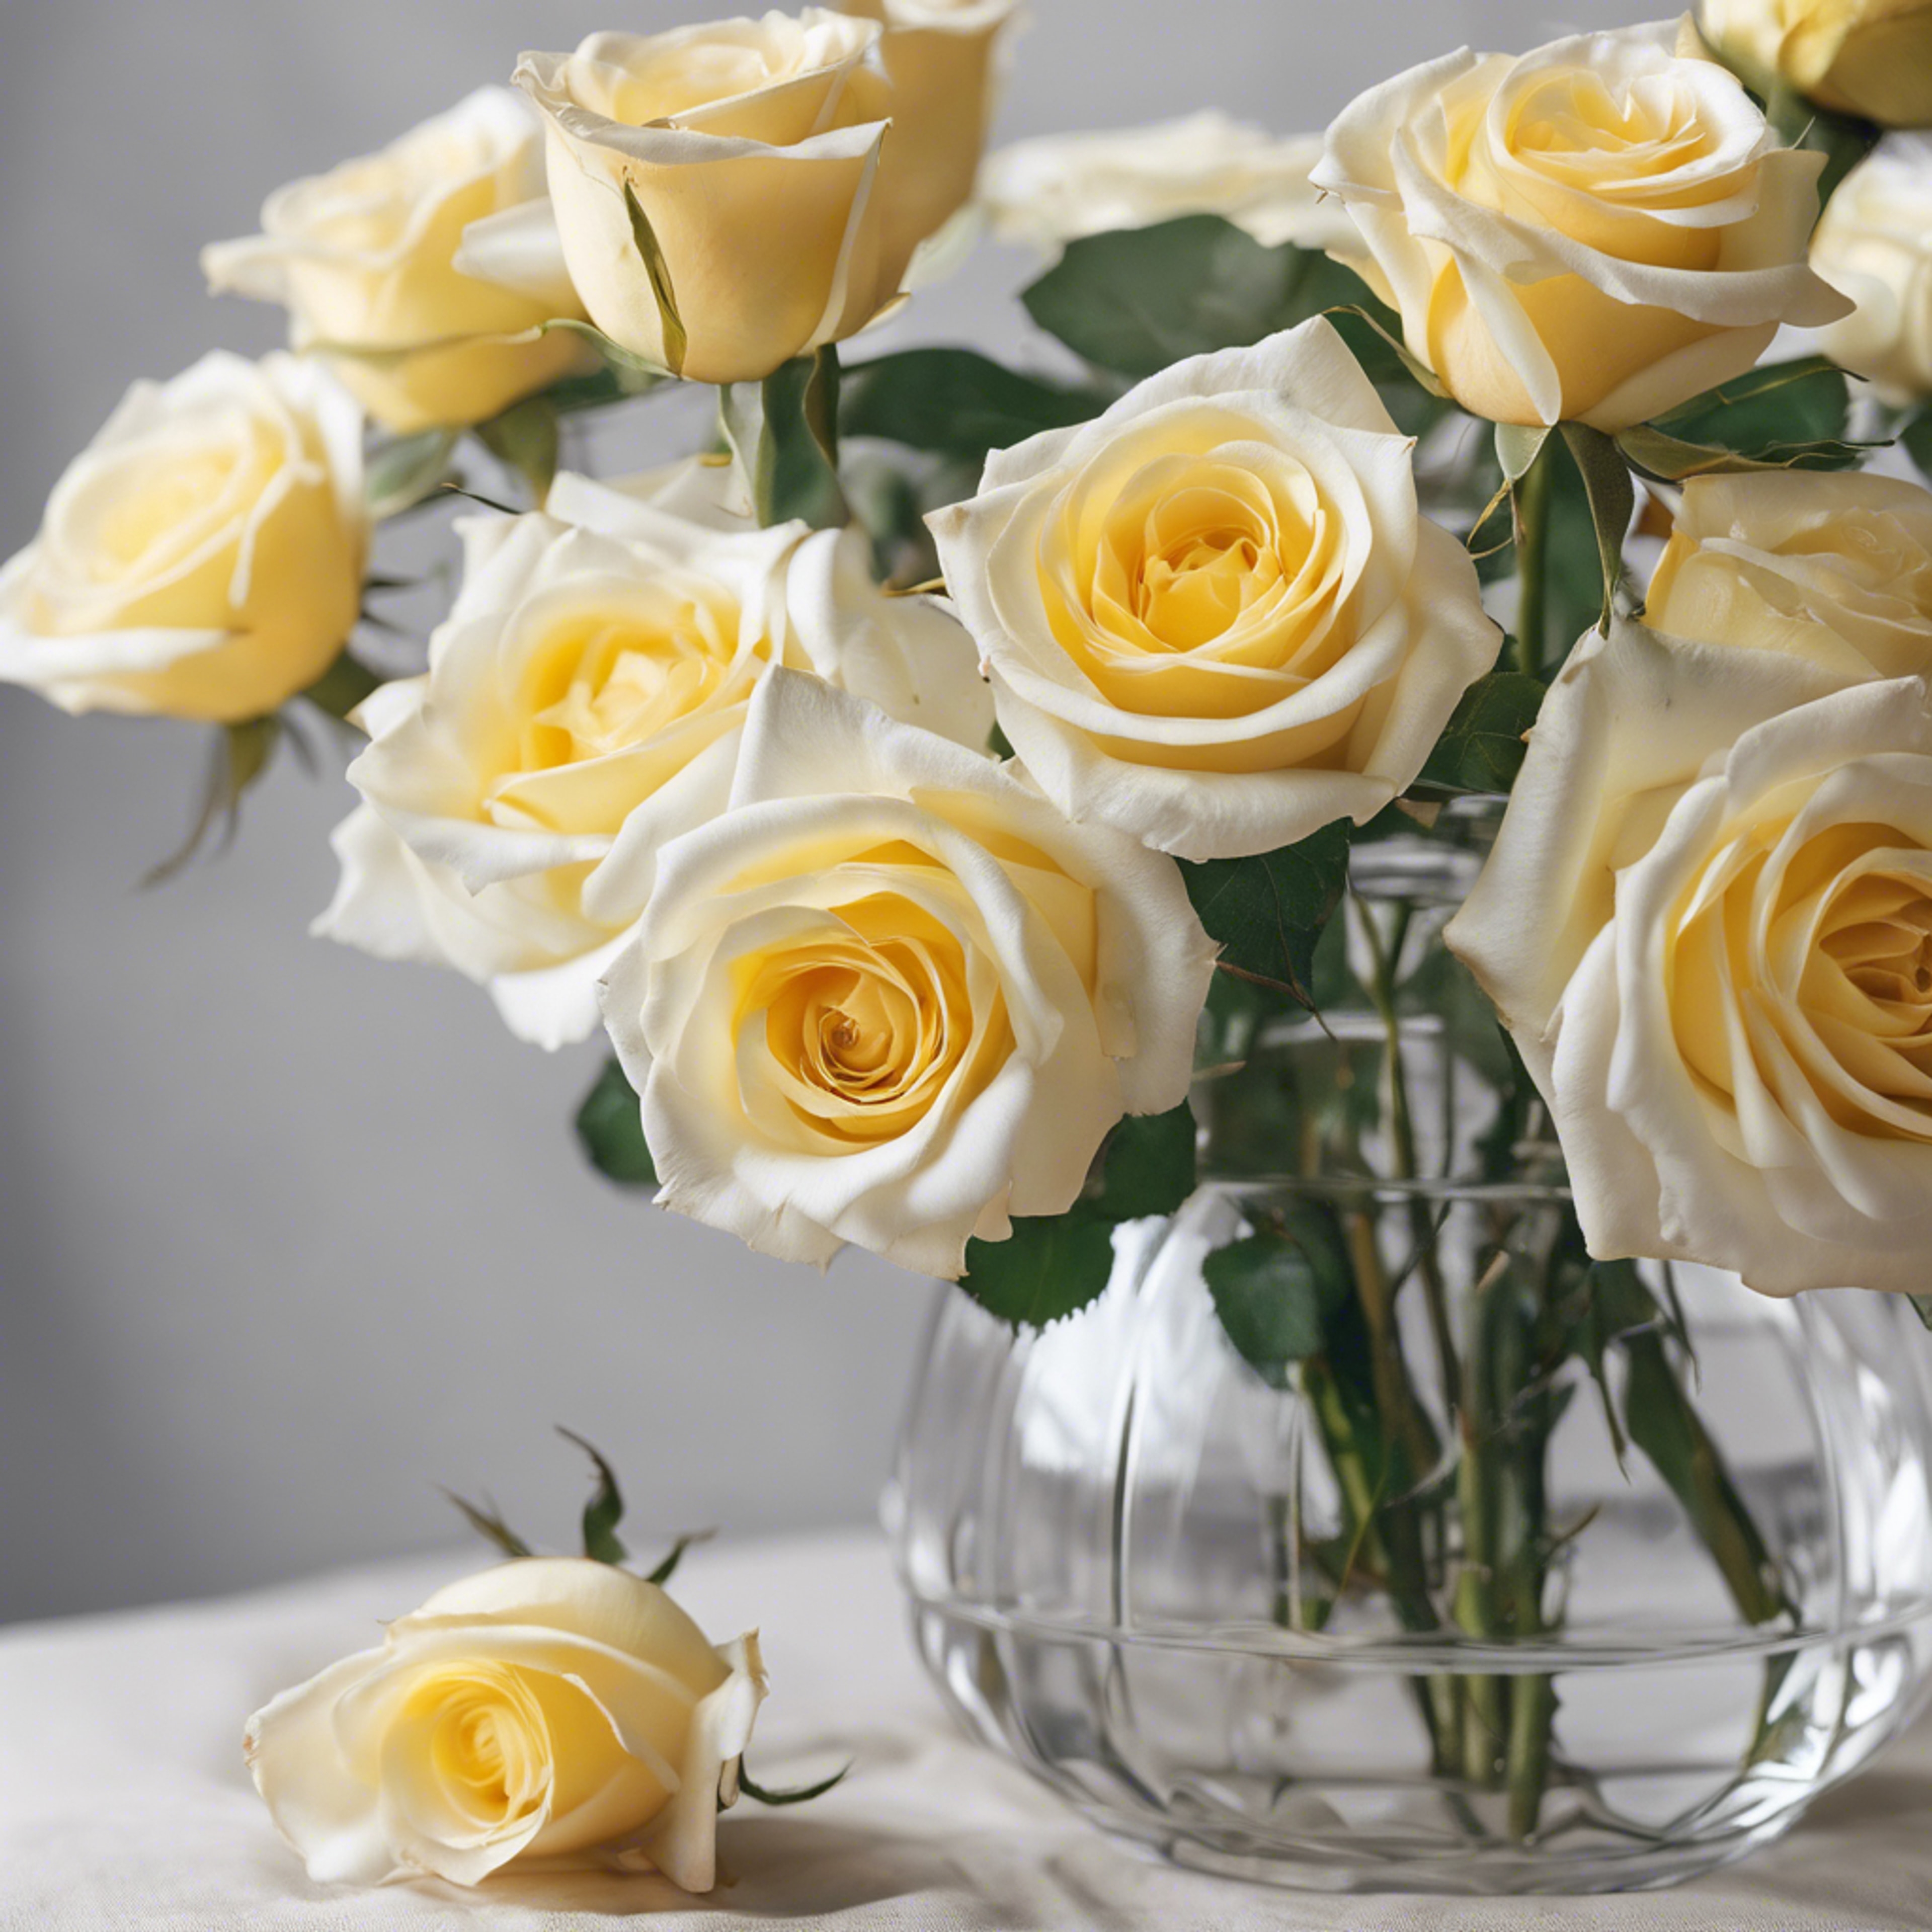 A beautiful array of luminescent white and yellow roses in a crystal clear vase. Tapeet[29c0e485a0b1412795b9]